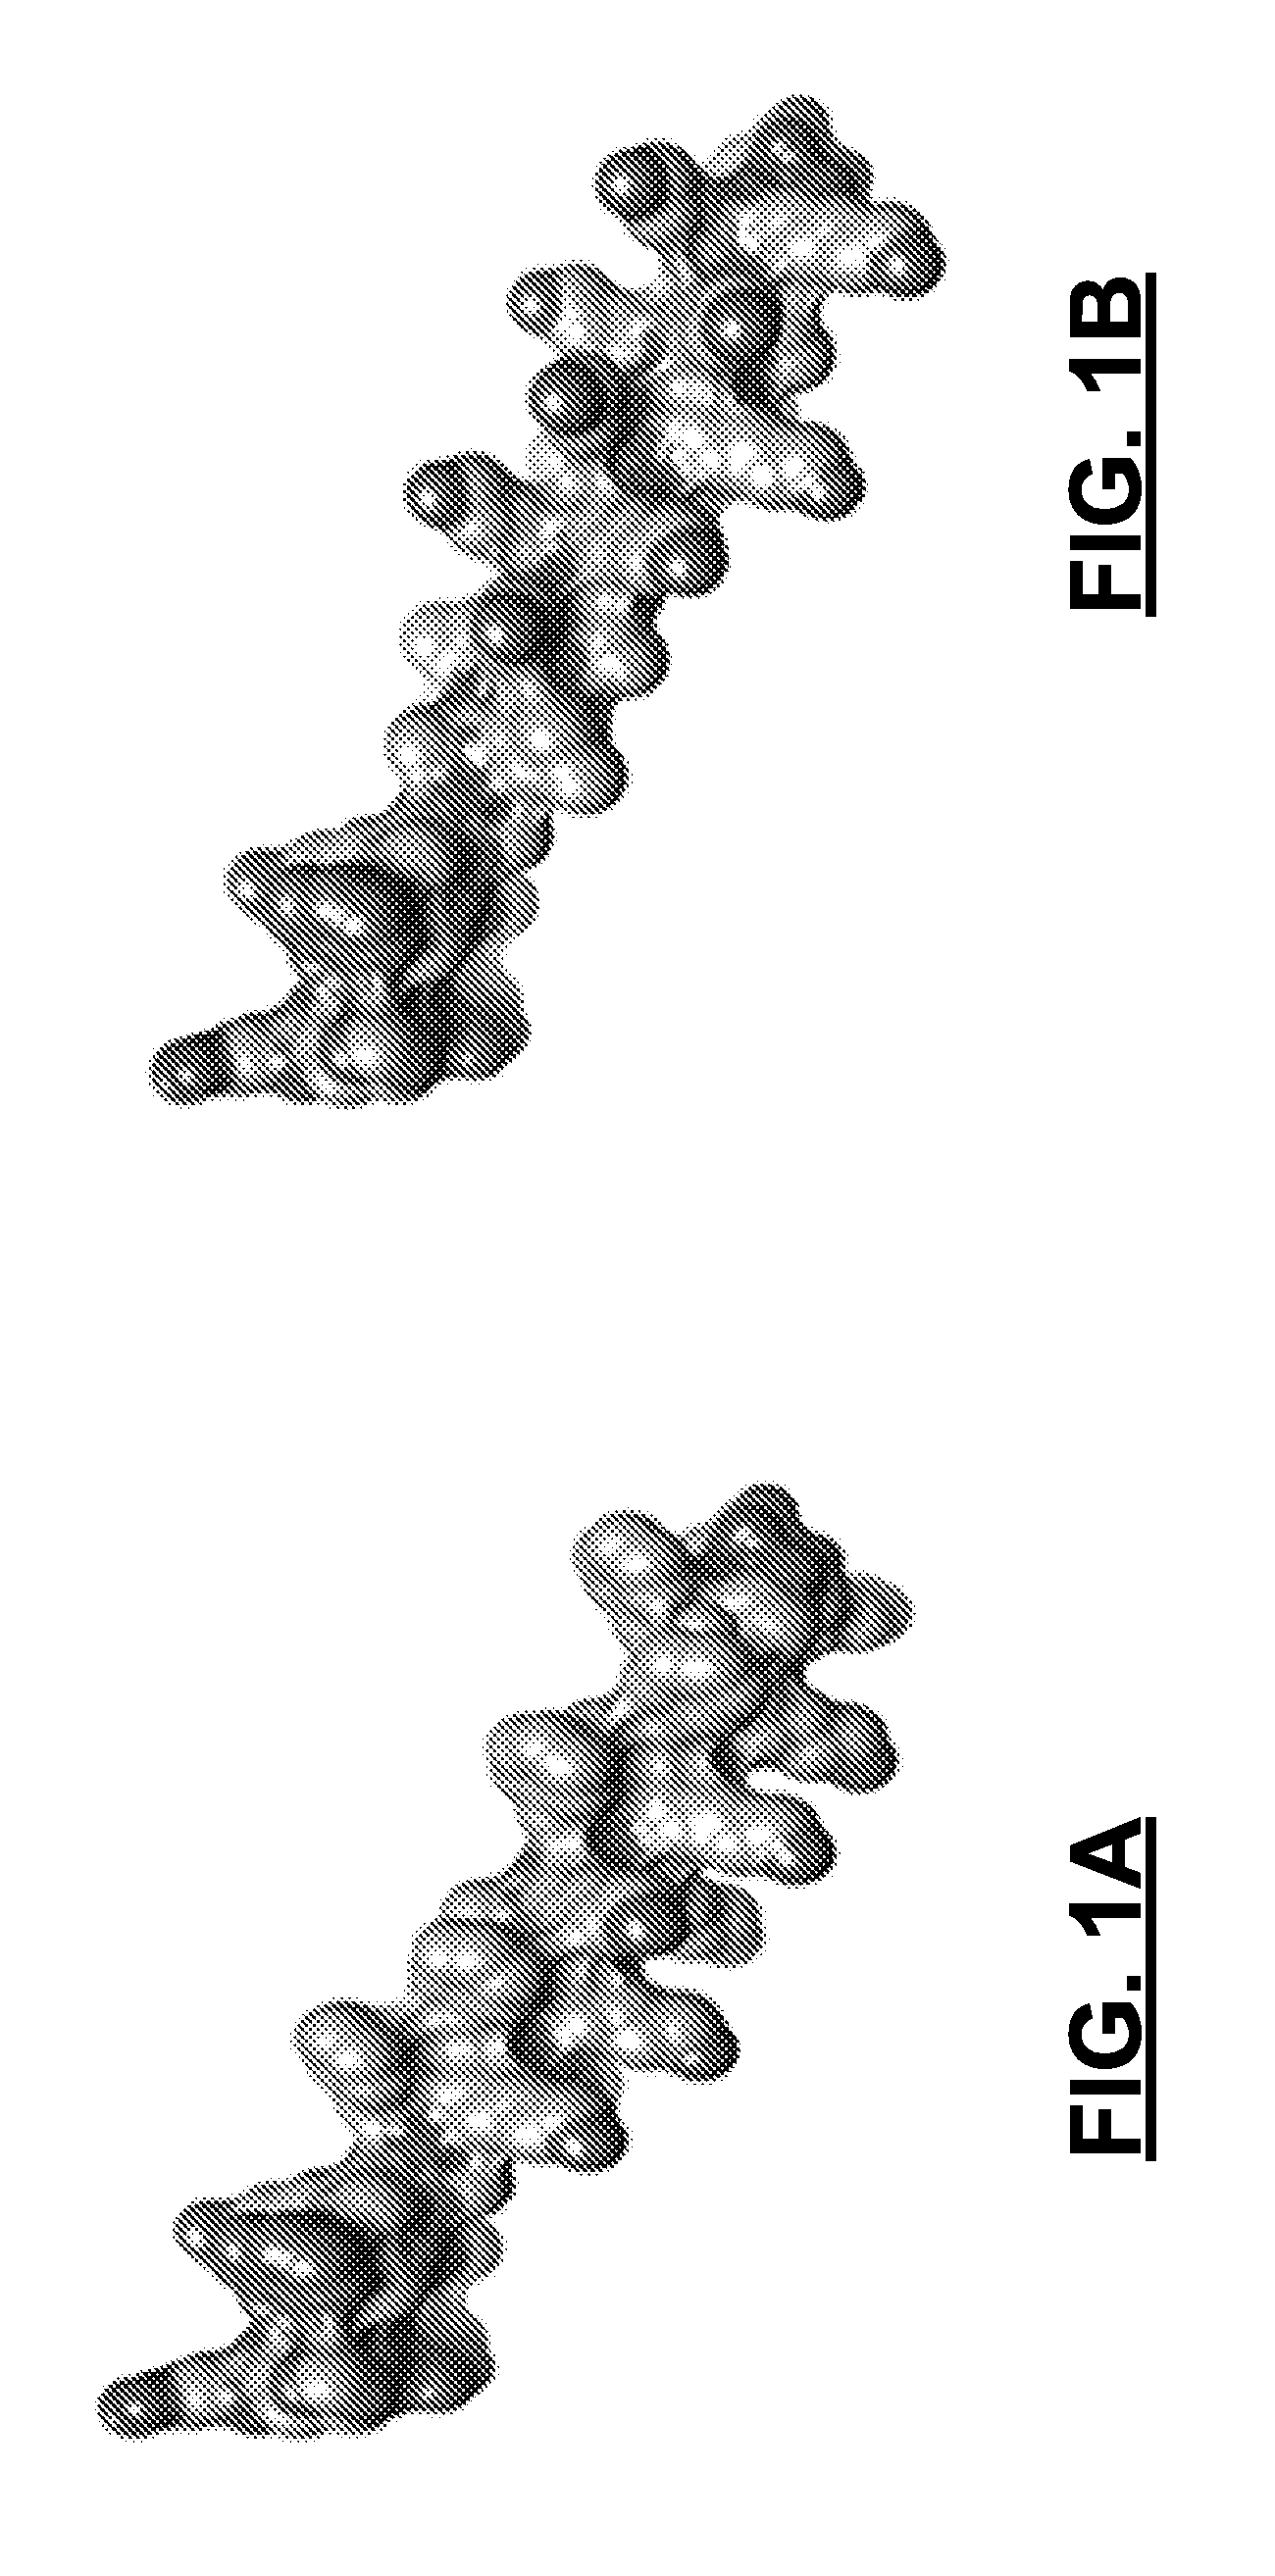 Lytic peptides having Anti-proliferative activity against prostate cancer cells